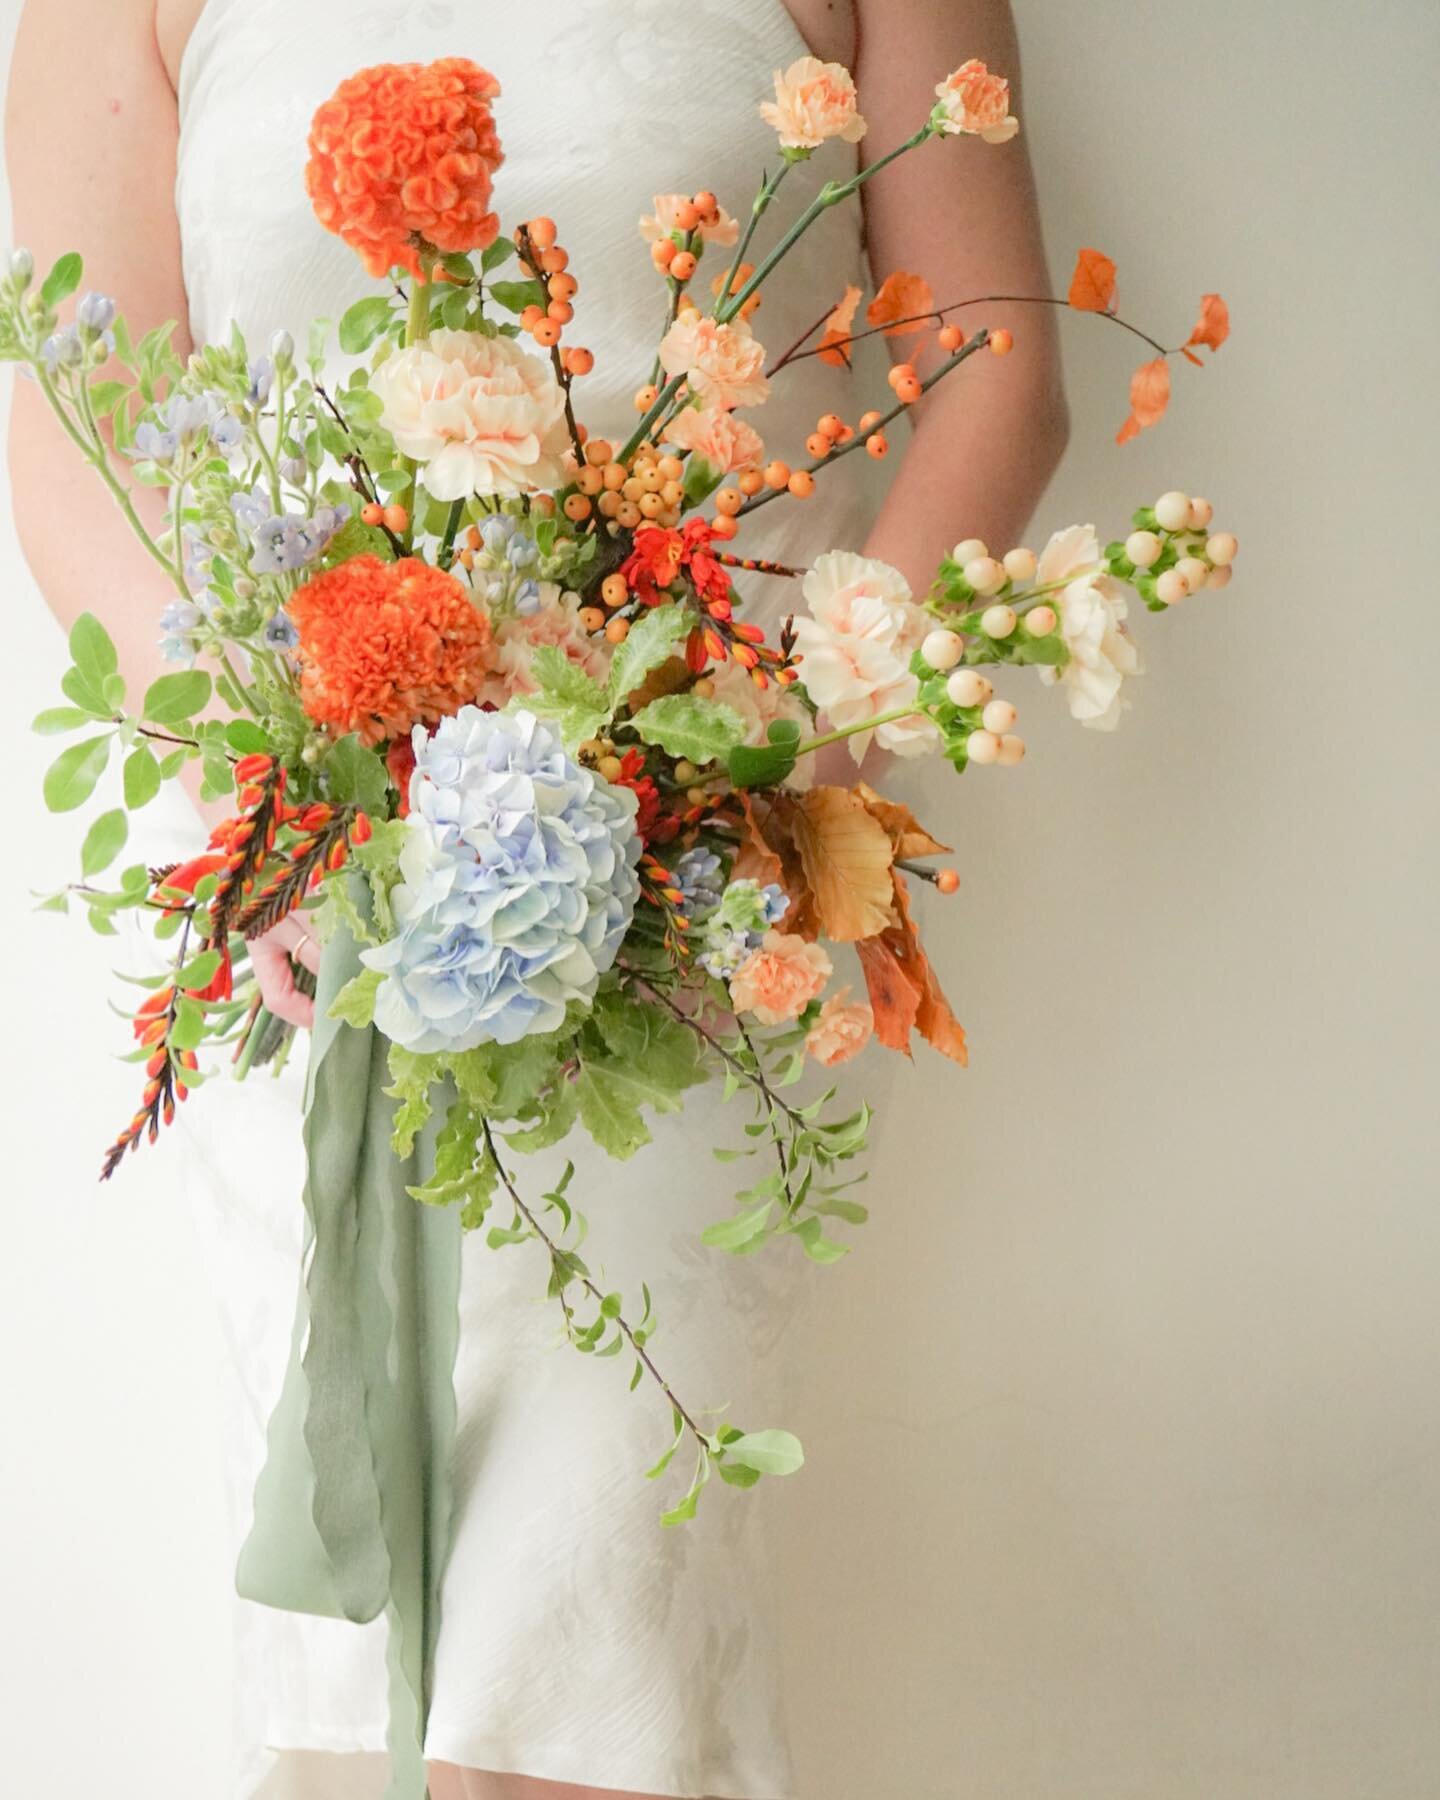 Pastel blue and a pop of orange, spring meadow style for Alethea &amp; Nigel. 

This one&rsquo;s especially meaningful bcos our flowers have been part of their celebrations since they first started dating. The gradual intensification of peach shades 